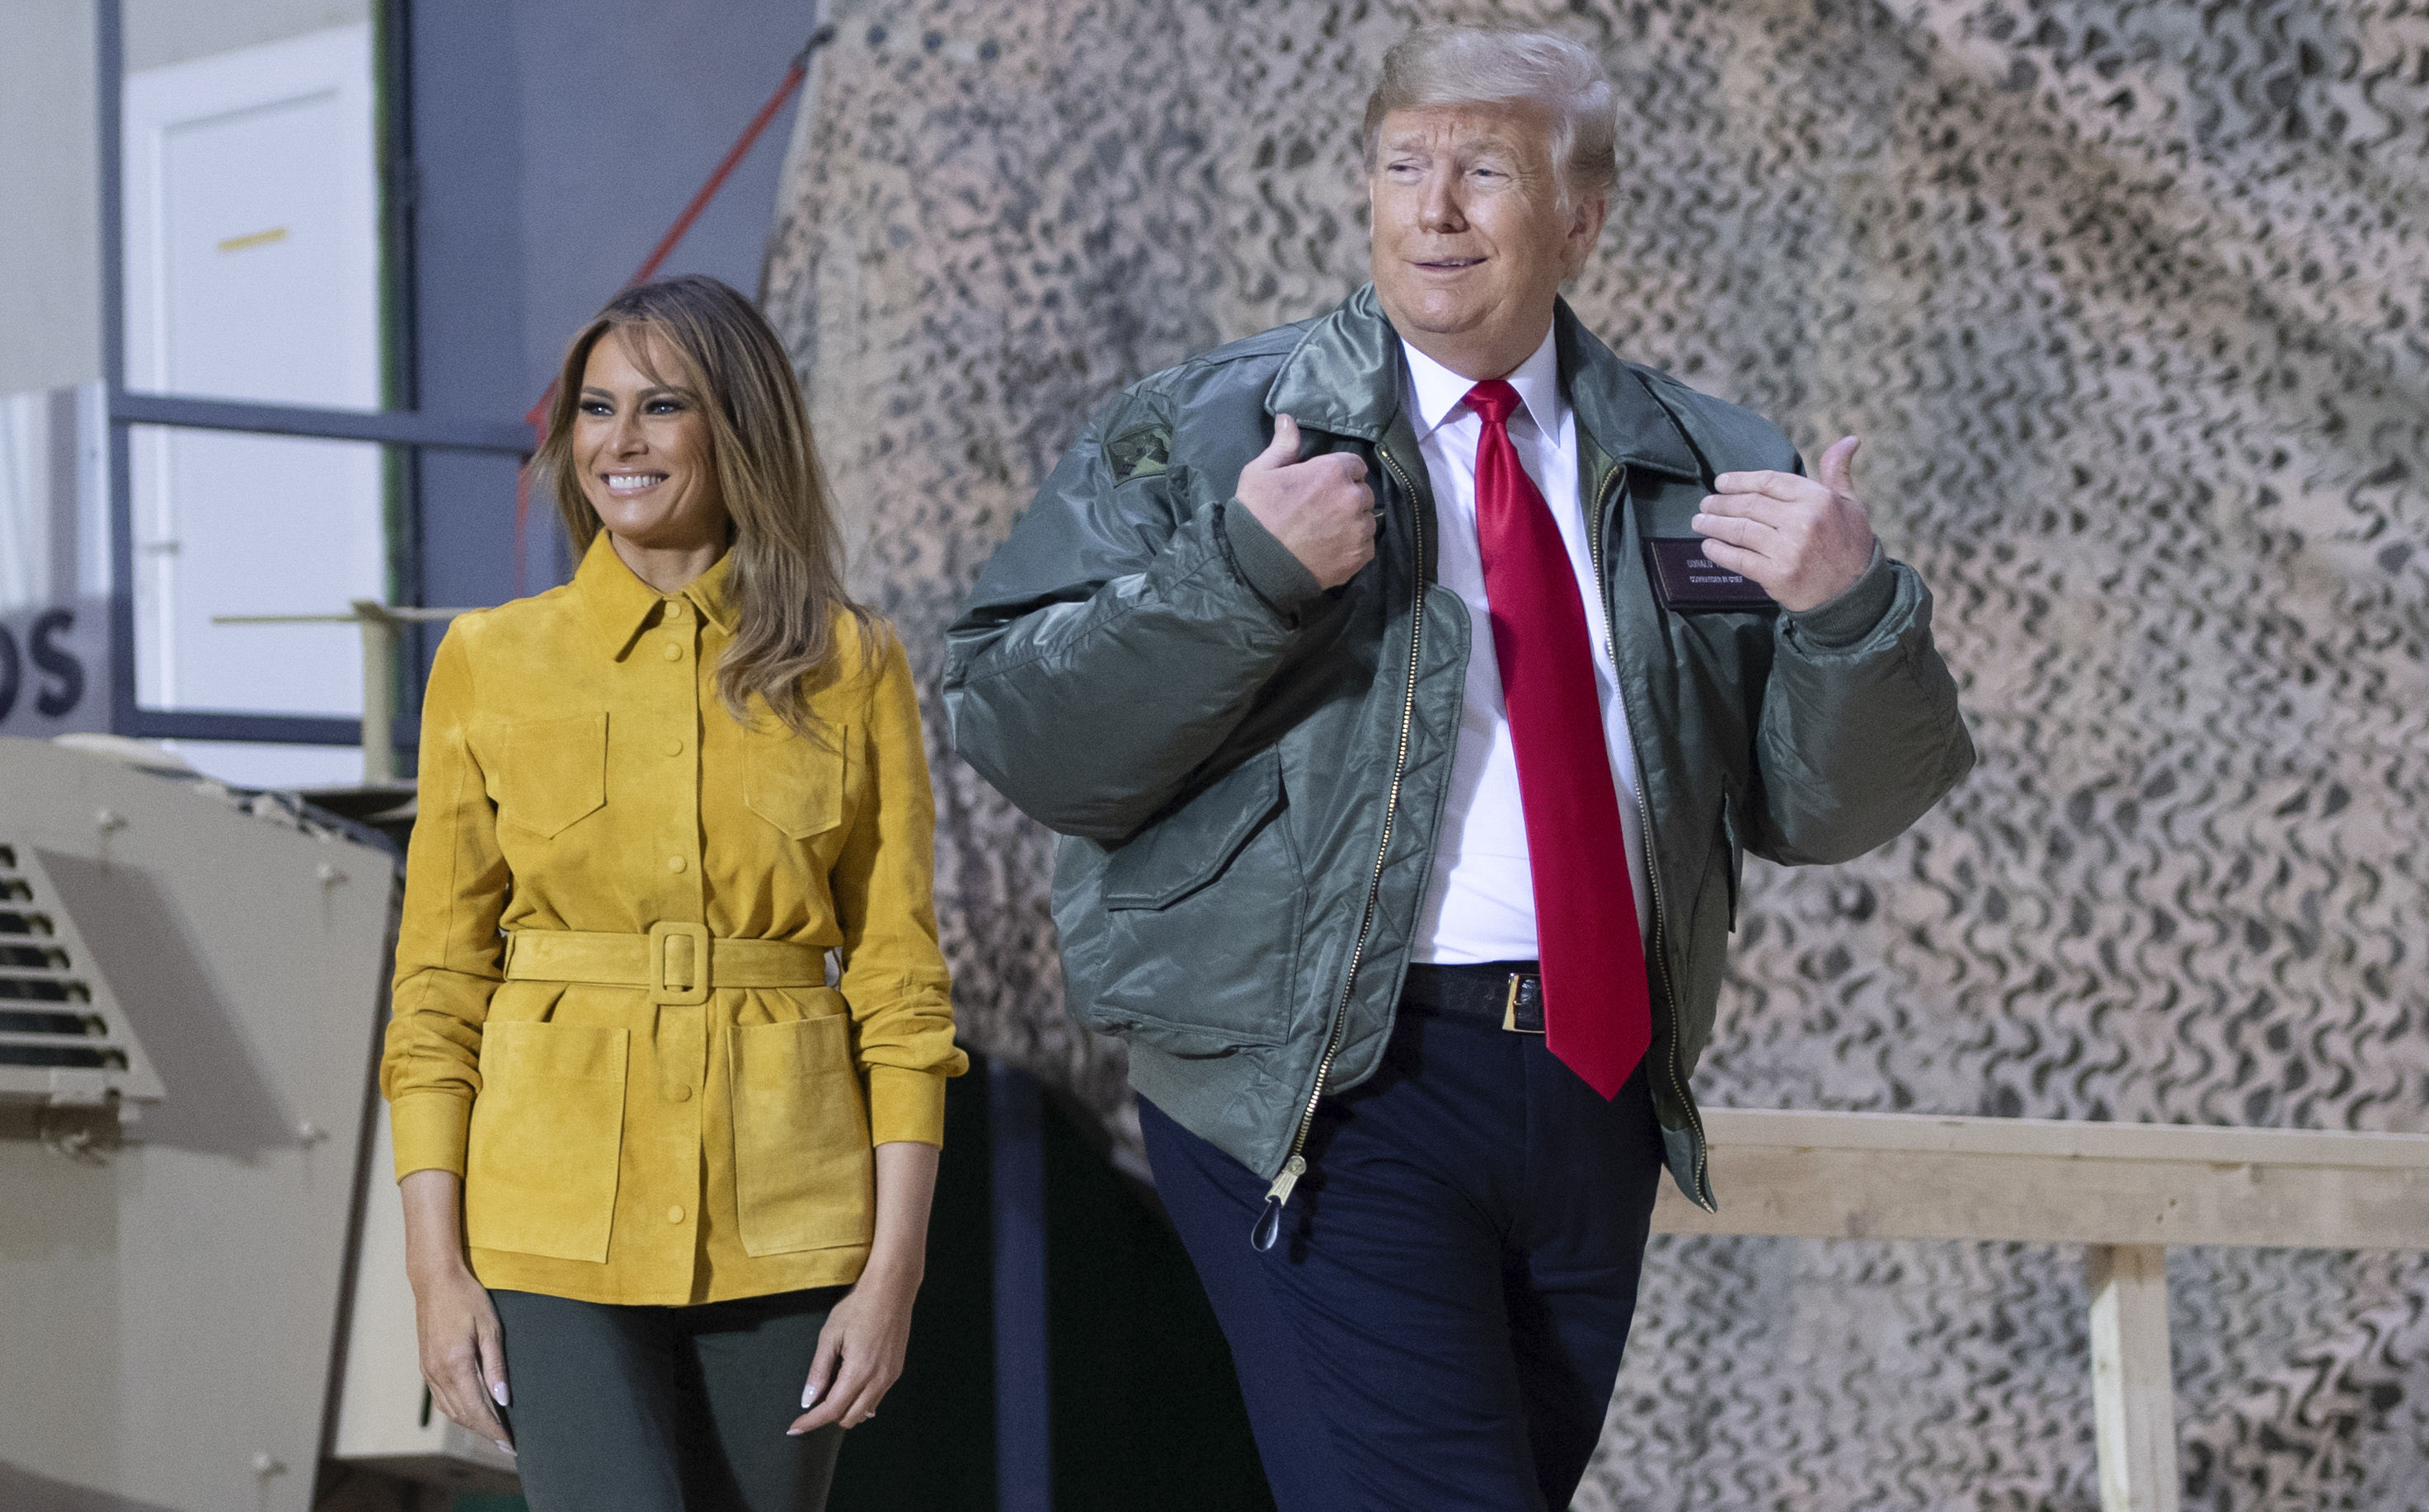 President Donald Trump and First Lady Melania Trump arrive to speak to members of the US military during an unannounced trip to Al Asad Air Base in Iraq on December 26, 2018. (SAUL LOEB—AFP/Getty Images)